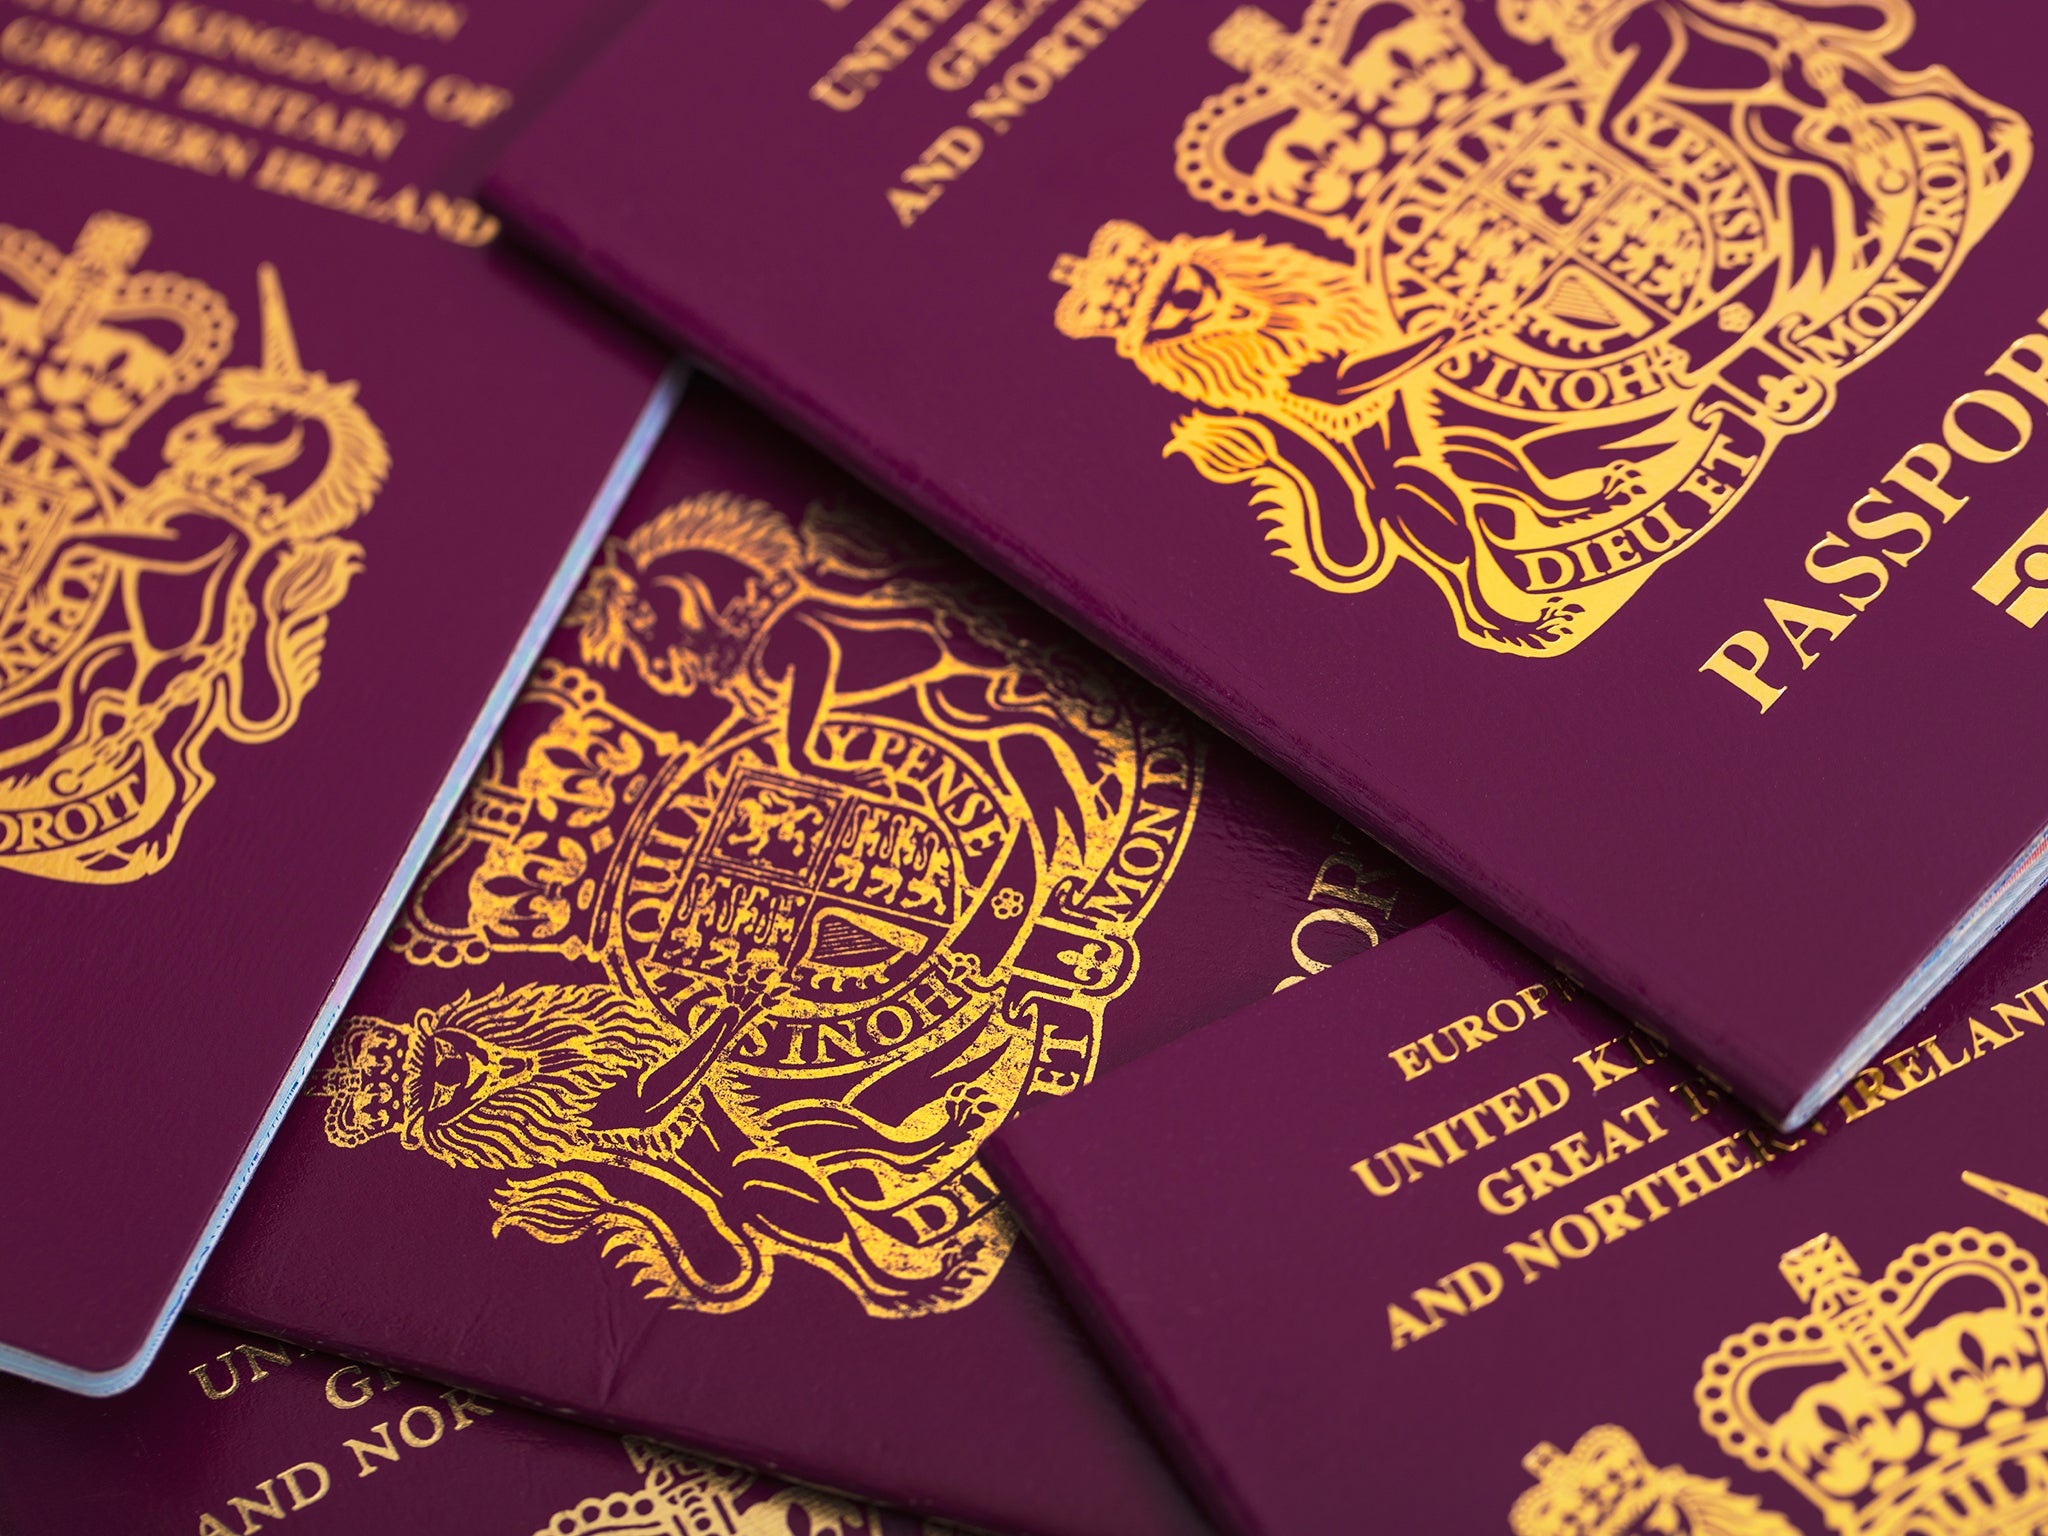 De La Rue has produced the British passport for the past nine years